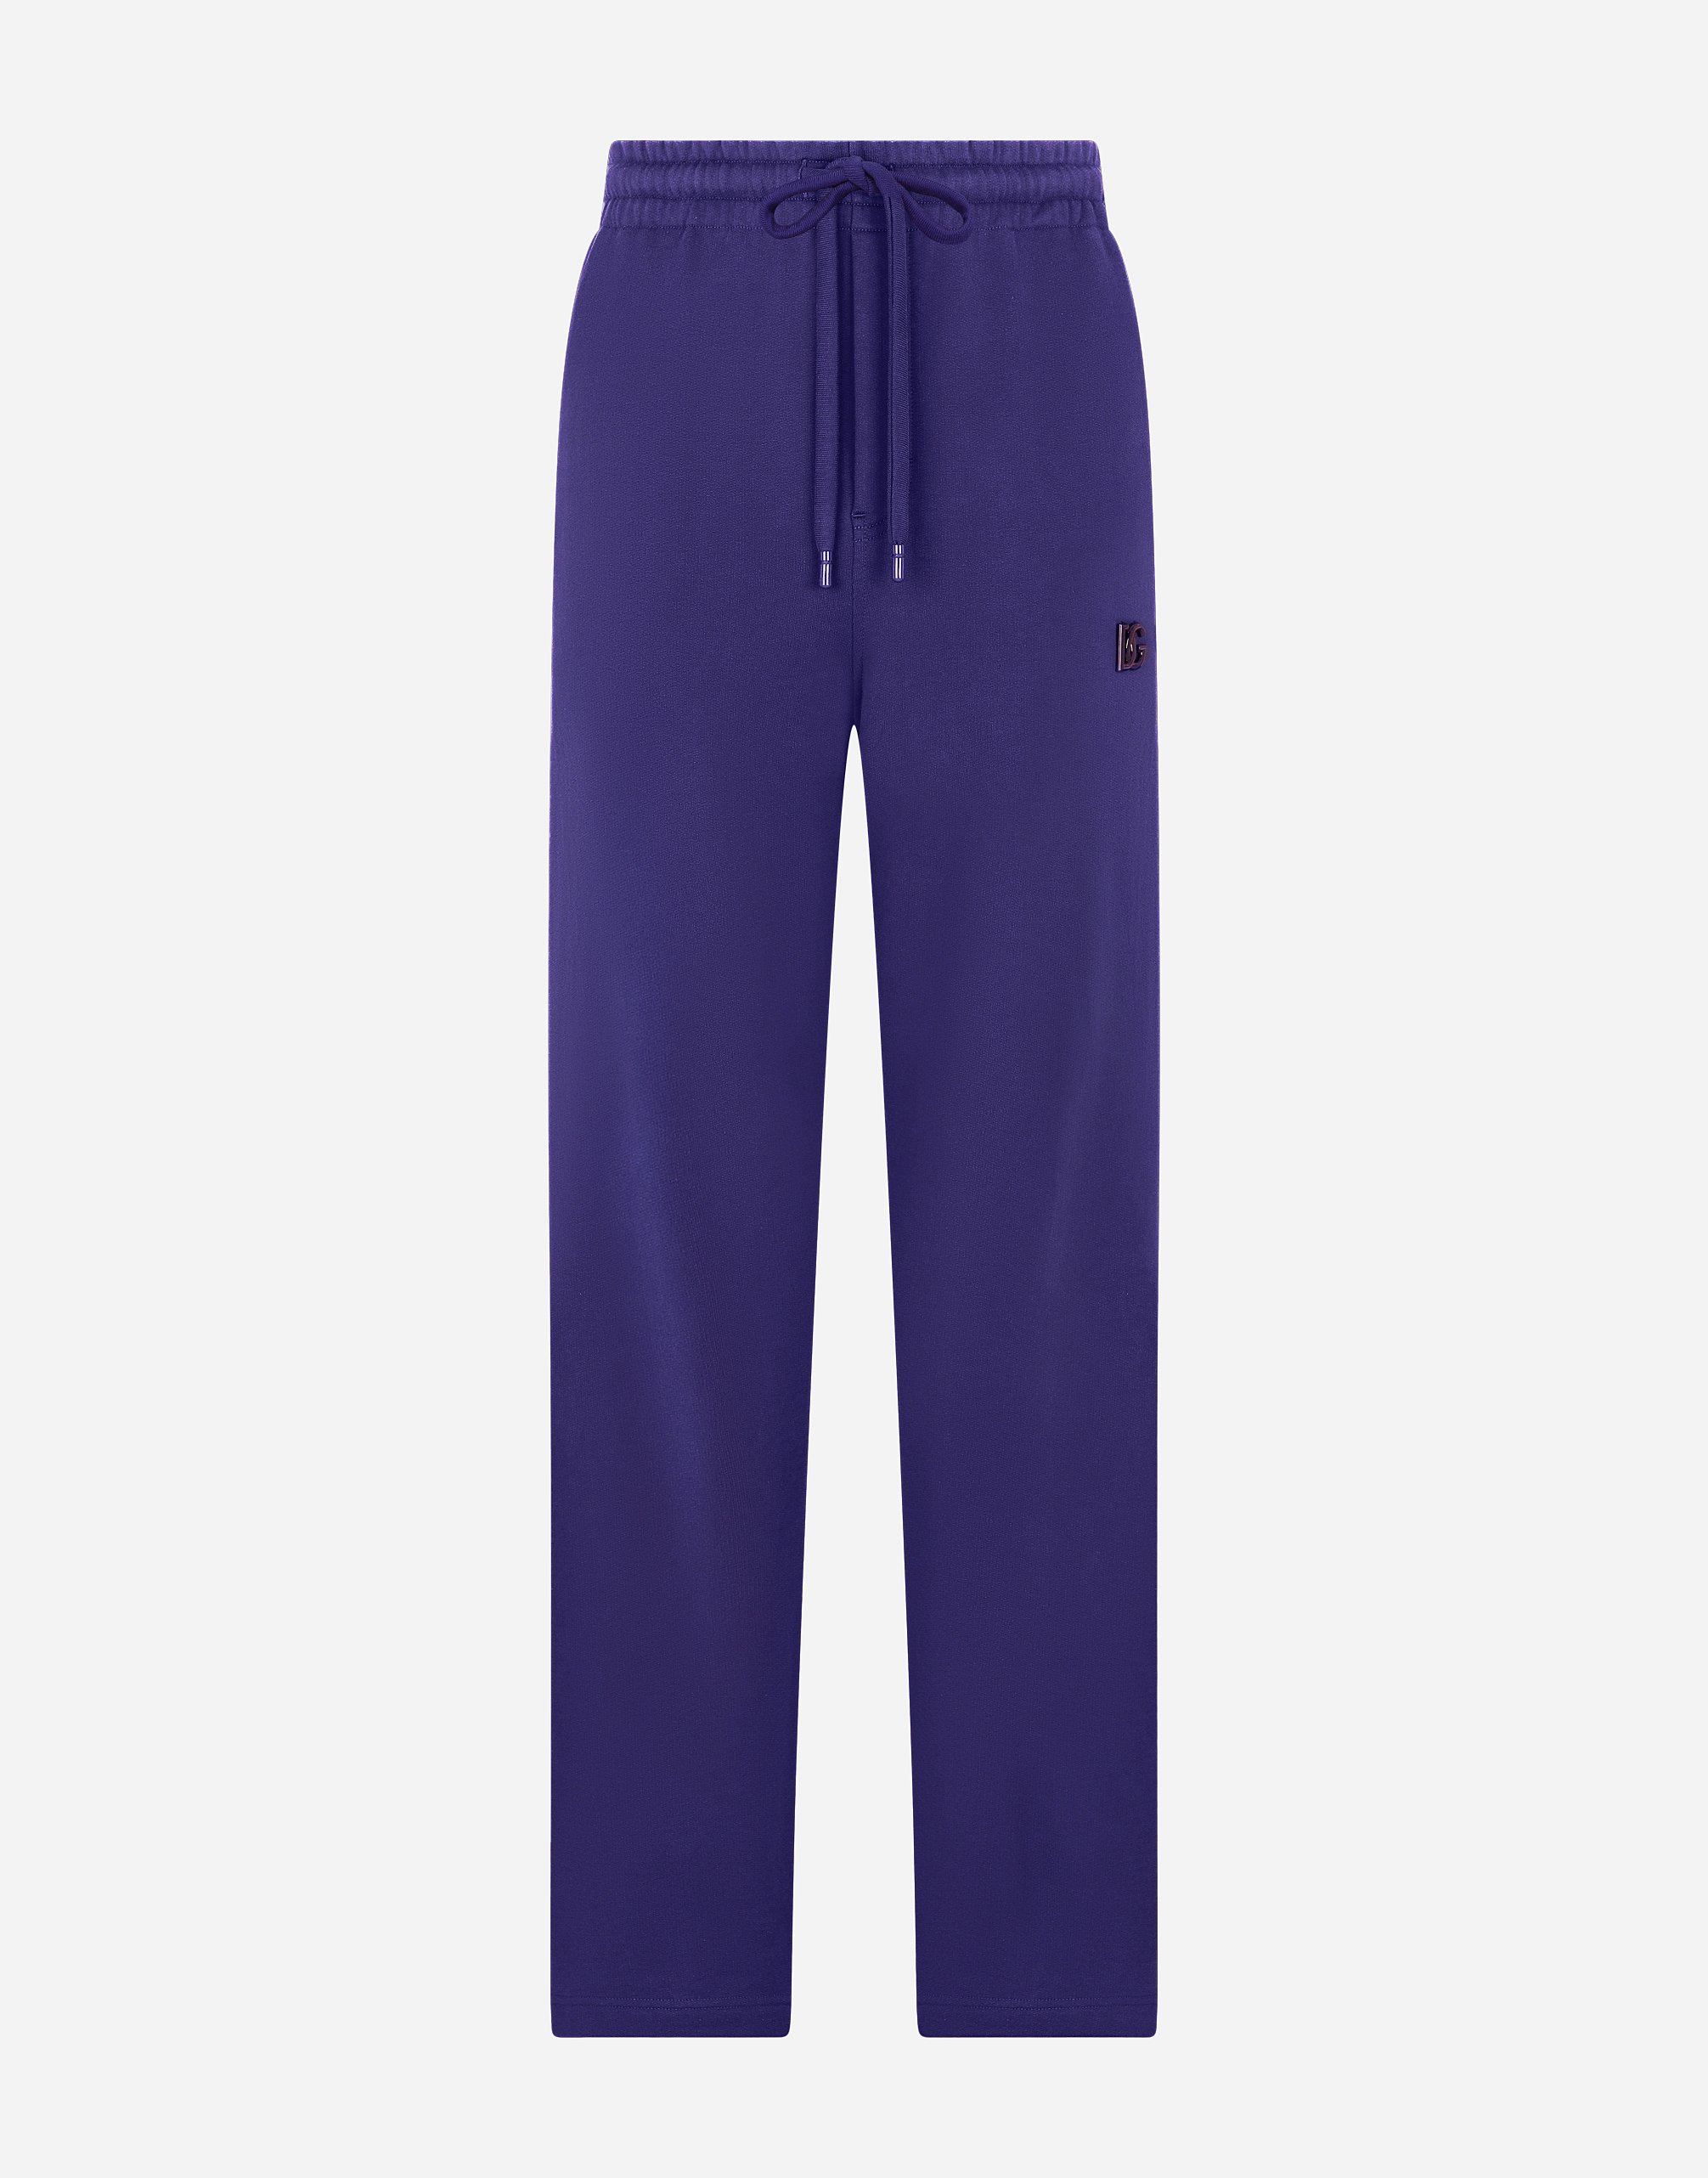 Jersey jogging pants with DG logo in Purple